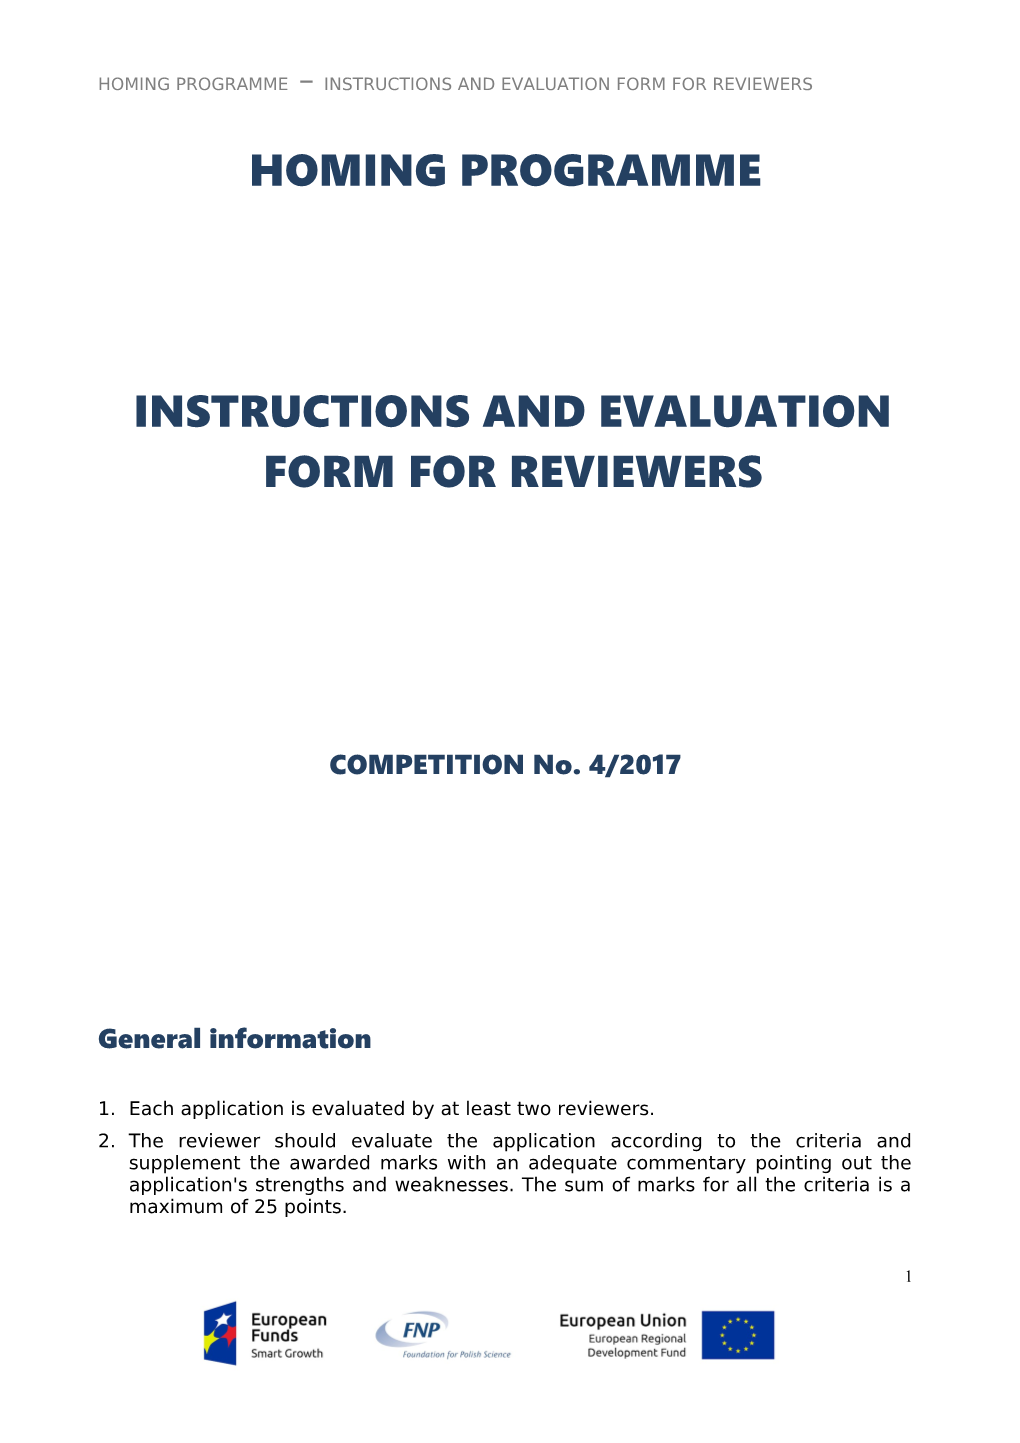 Homingprogramme INSTRUCTIONS and EVALUATION FORM for REVIEWERS